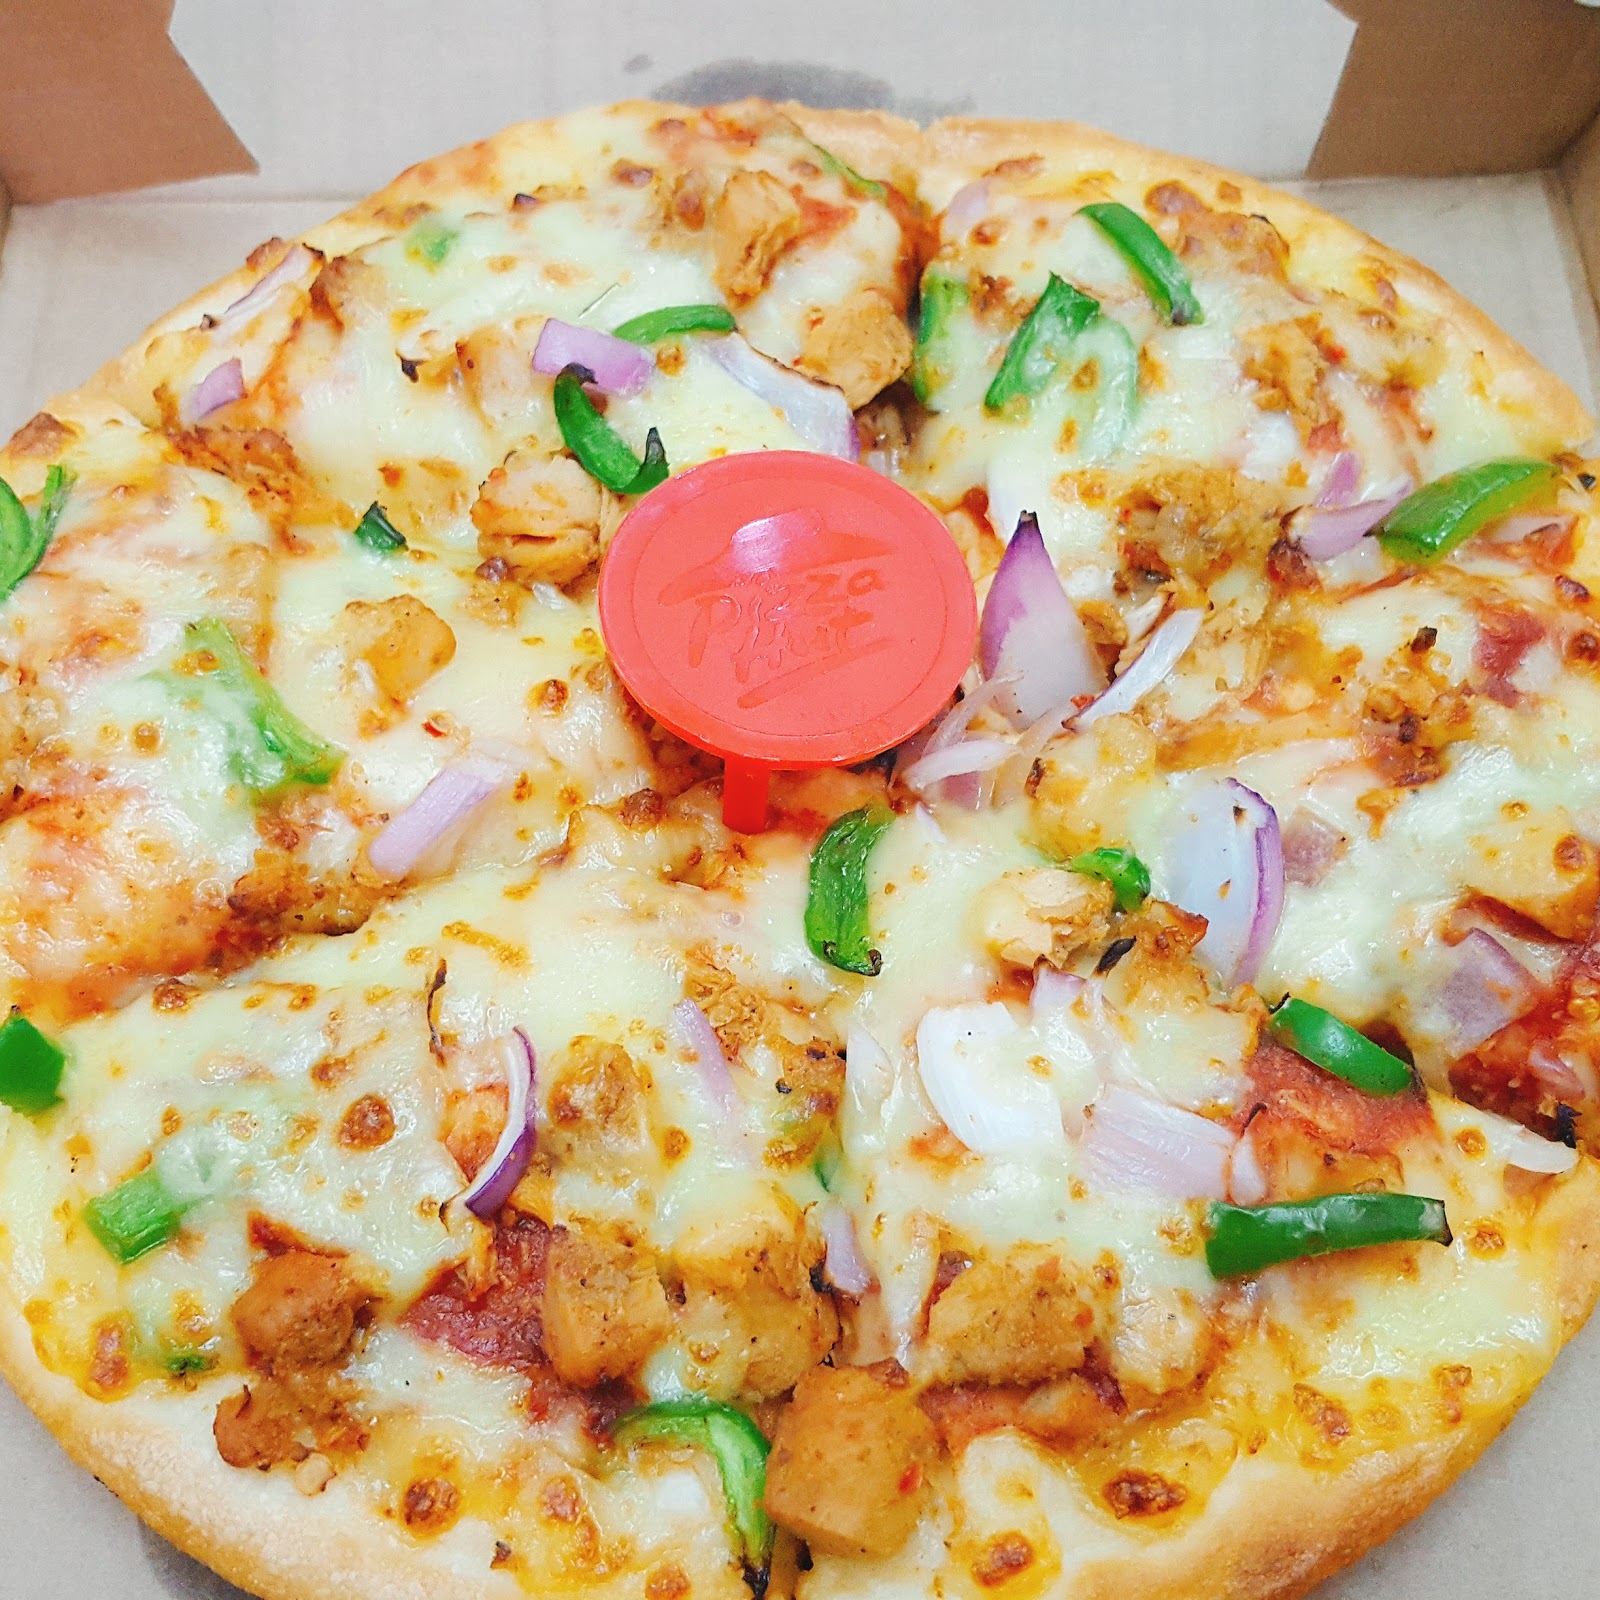 Pizza Hut Wow Deal Review Beautorgeous World